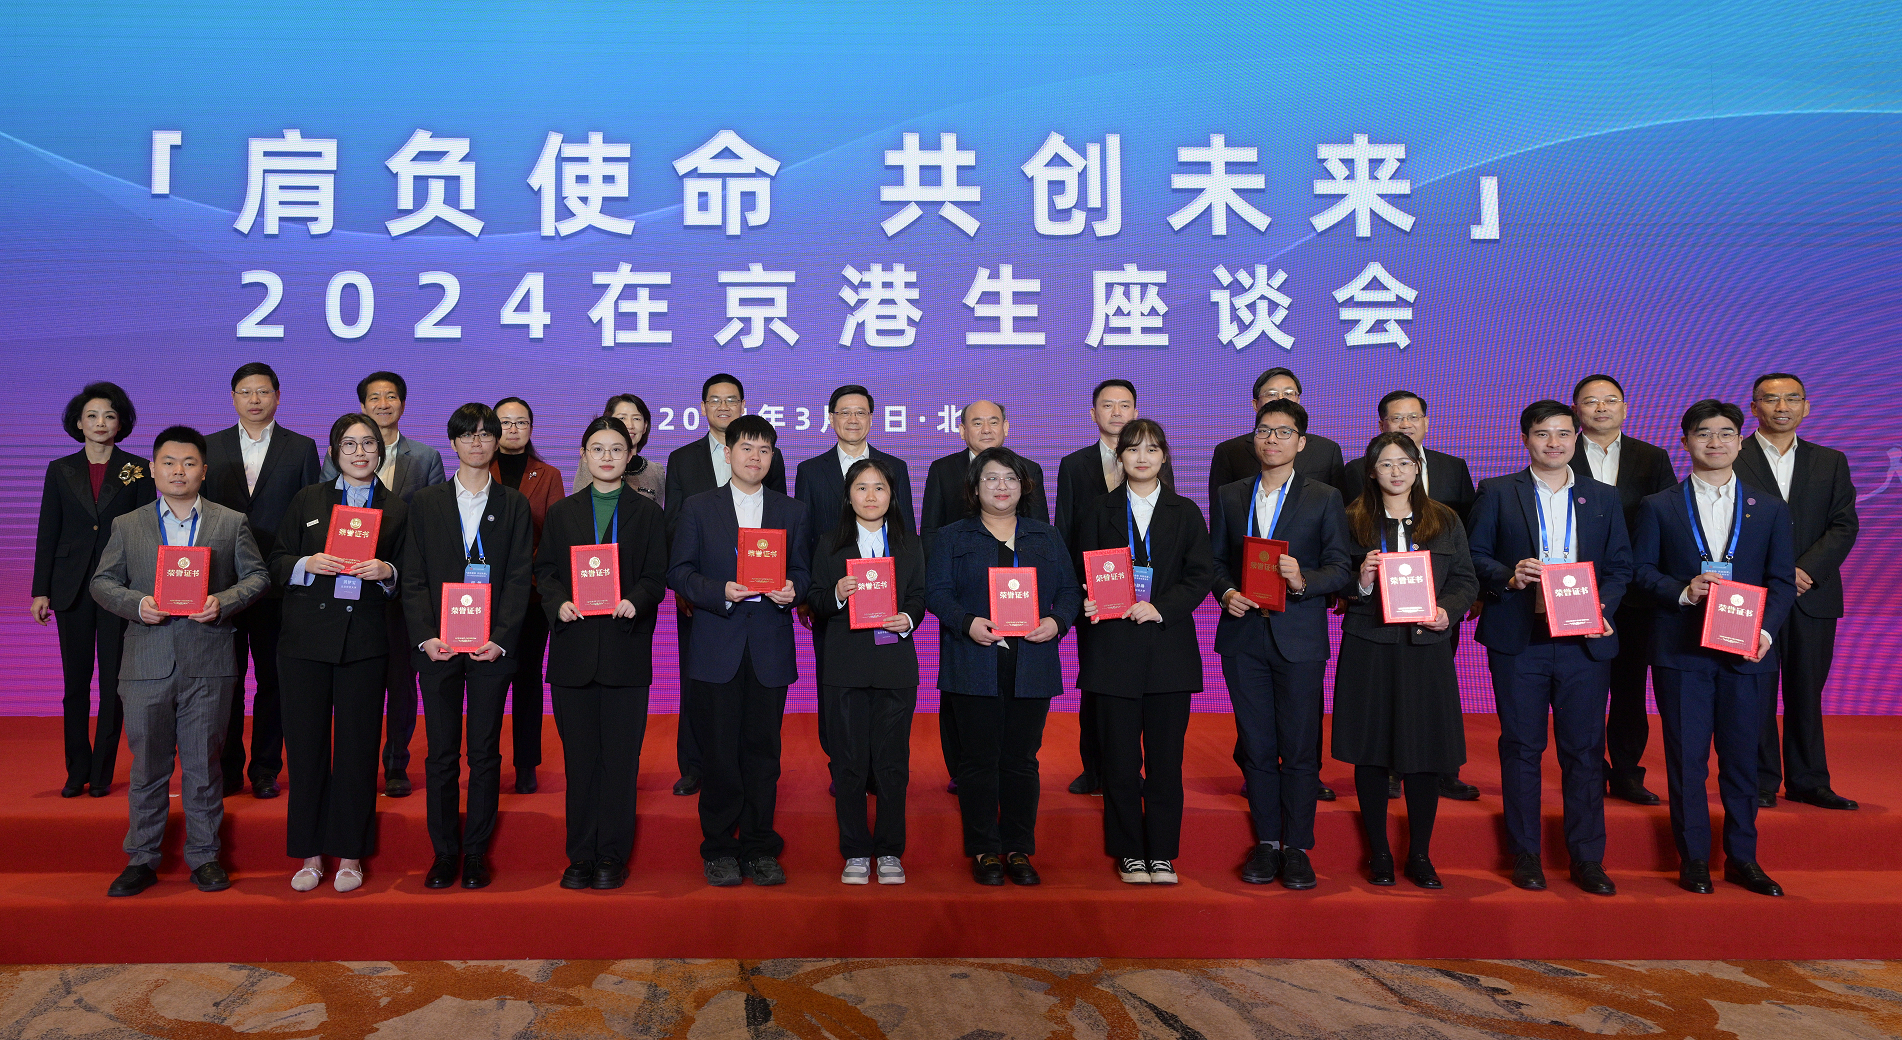 The Chief Executive, Mr John Lee, attended a seminar for Hong Kong students studying in Beijing organised by the Hong Kong Alumni Association of Beijing Universities in Beijing today (March 5). Photo shows Mr Lee (back row, centre), other officiating guests and awardees at the ceremony.